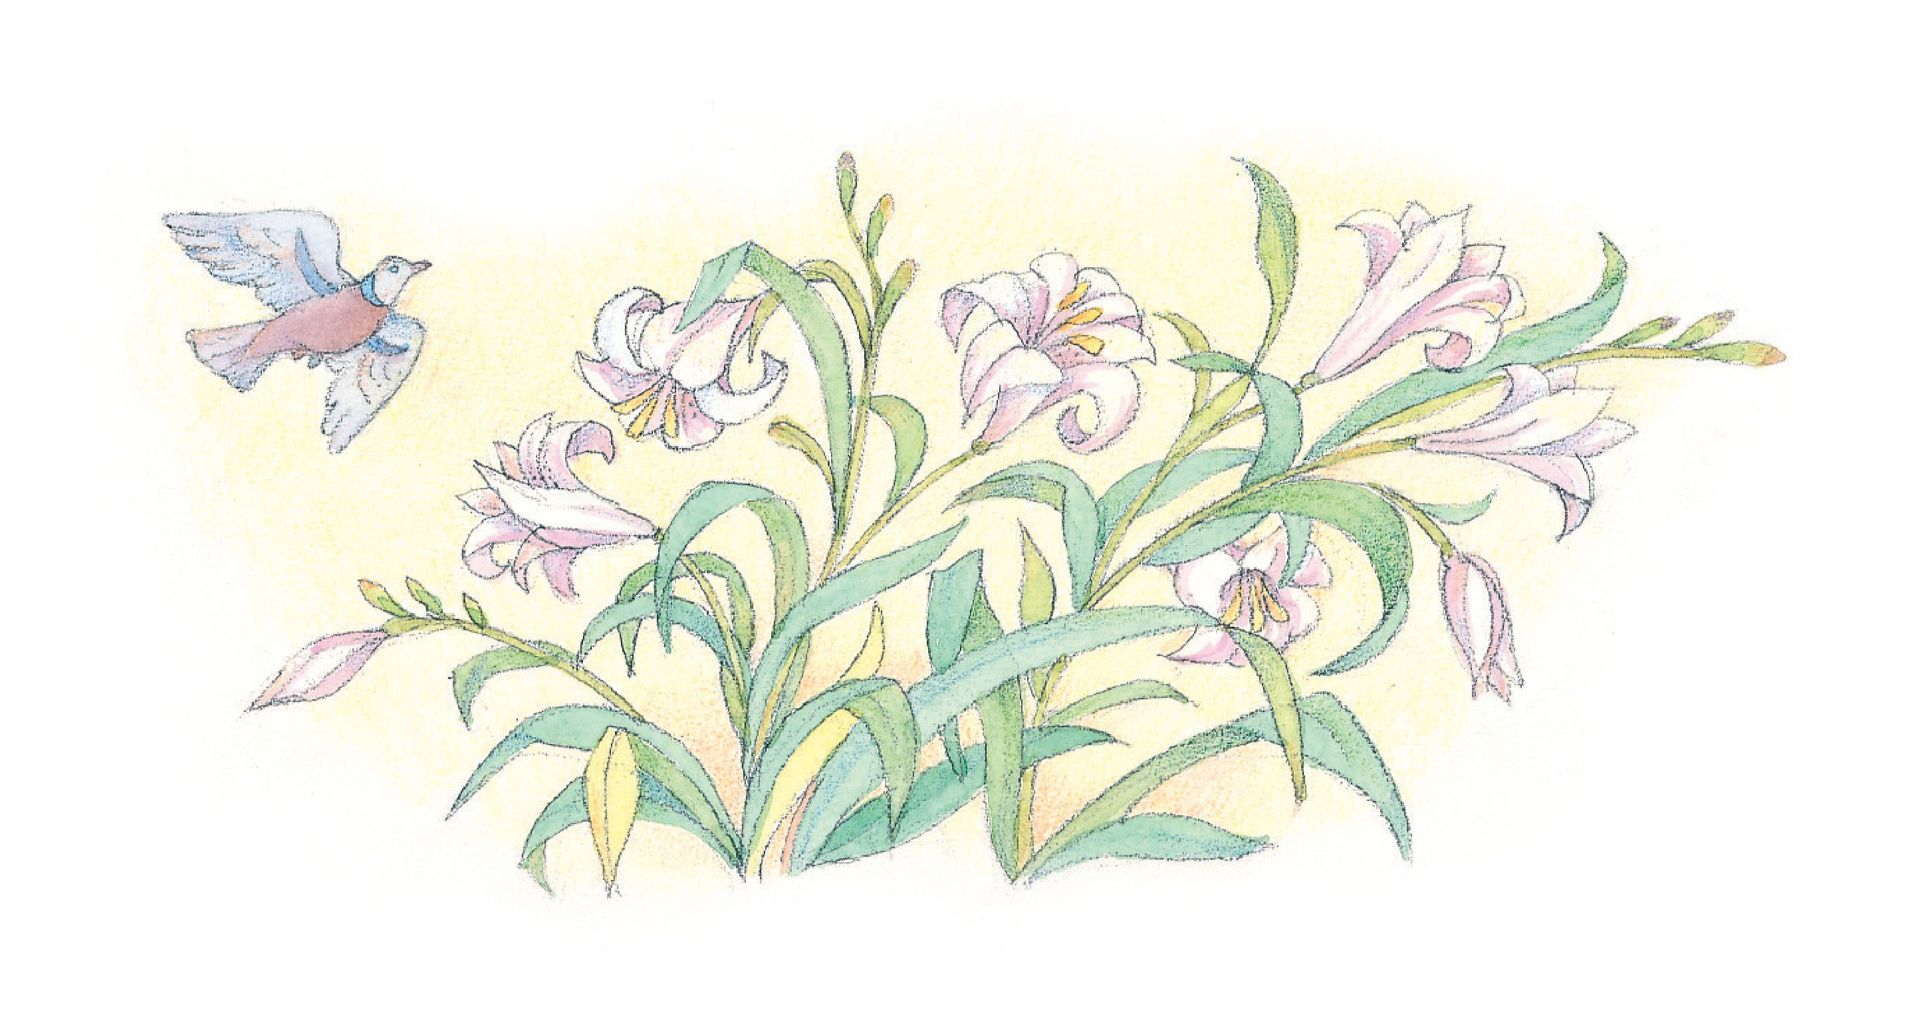 A bird and Easter lilies. From the Children’s Songbook, page 70, “Jesus Has Risen”; watercolor illustration by Phyllis Luch.